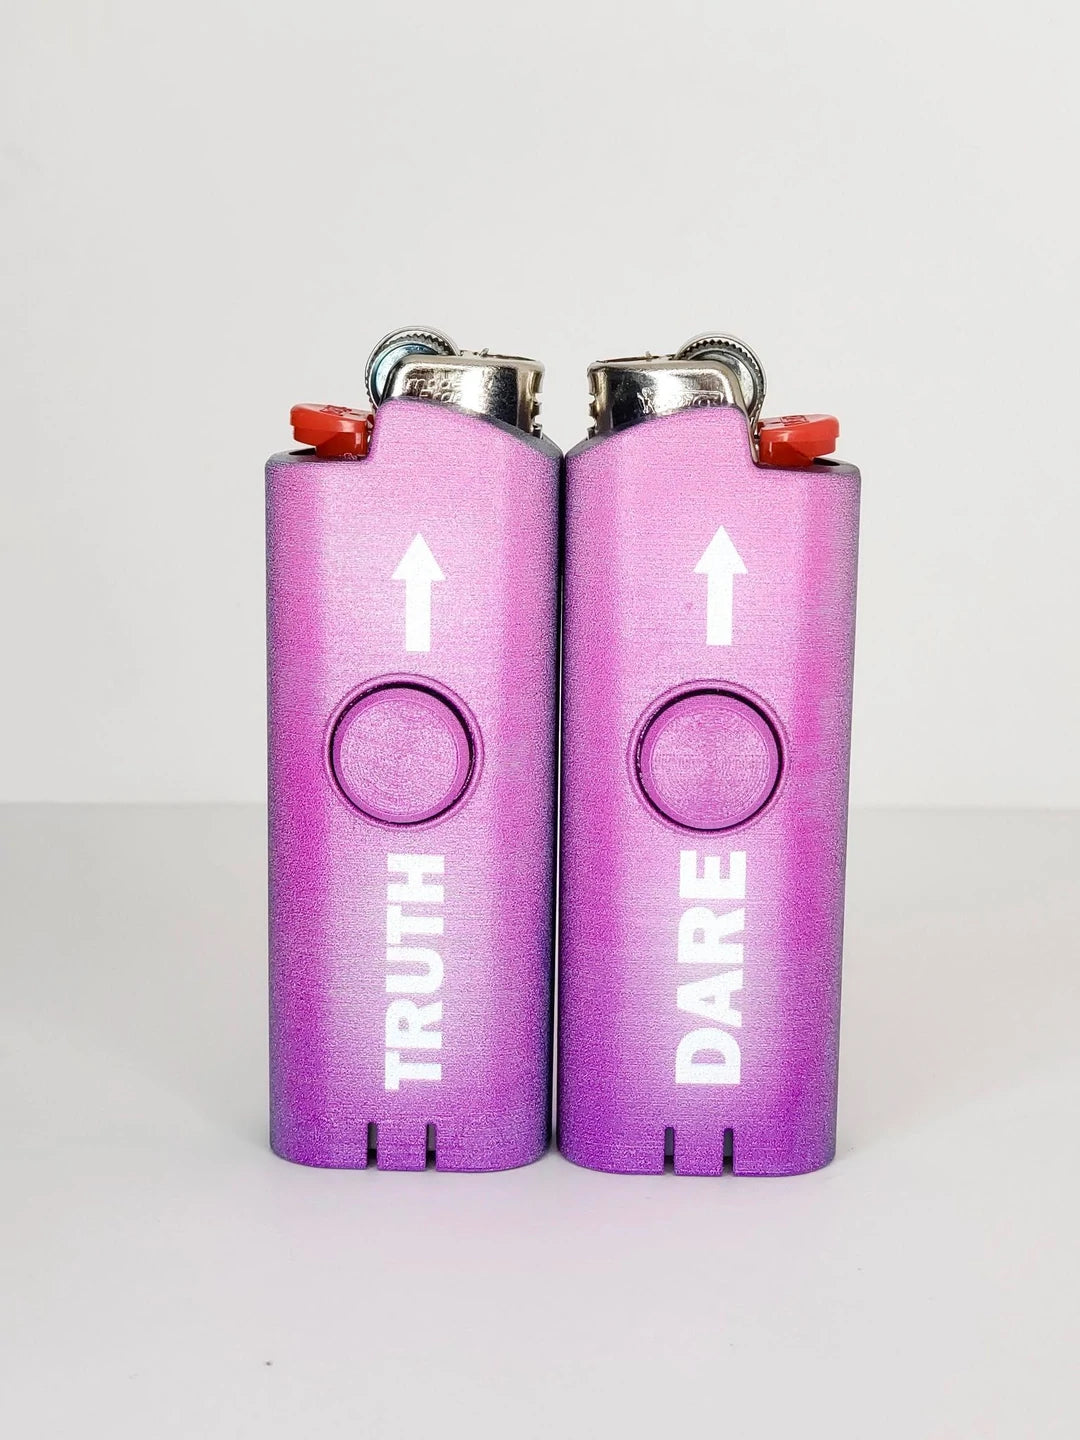 FLKR LYTR - THE LIMITED EDITION TRUTH OR DARE LIGHTER CASE FOR BIC®